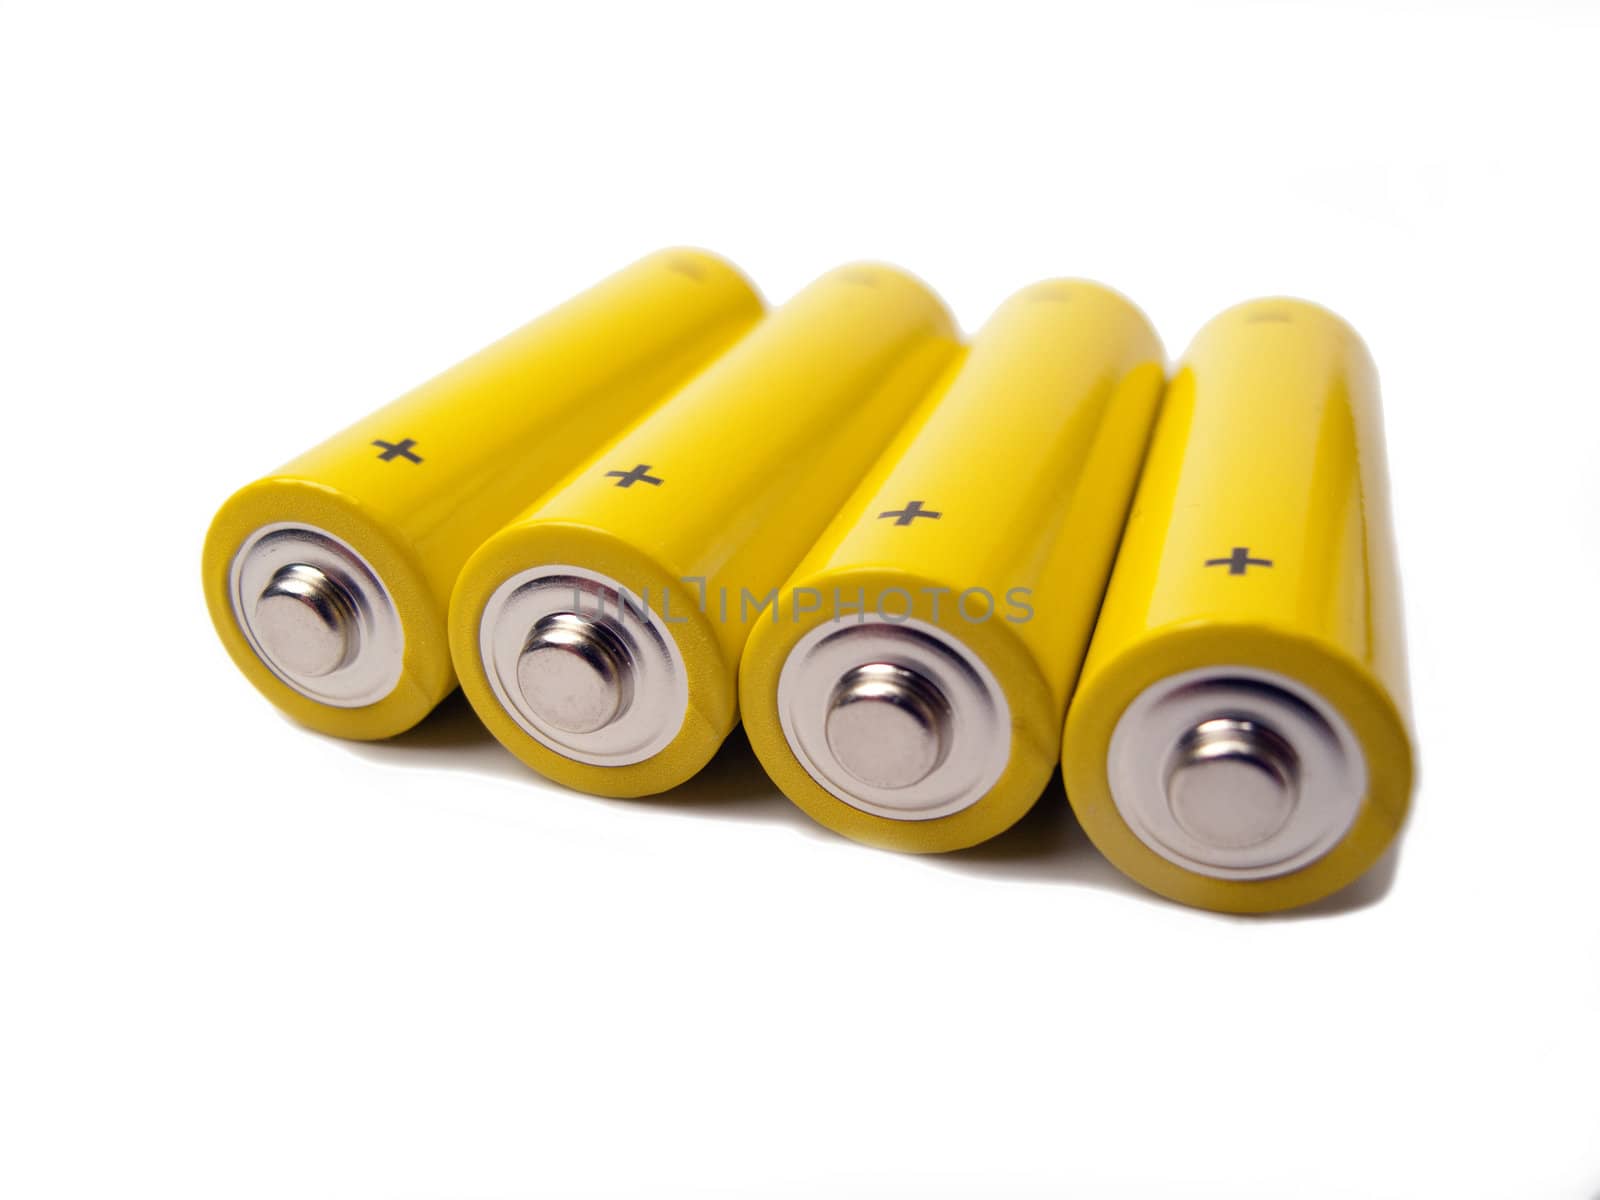 Four yellow batteries with the contacts and the plus sign showing, white background